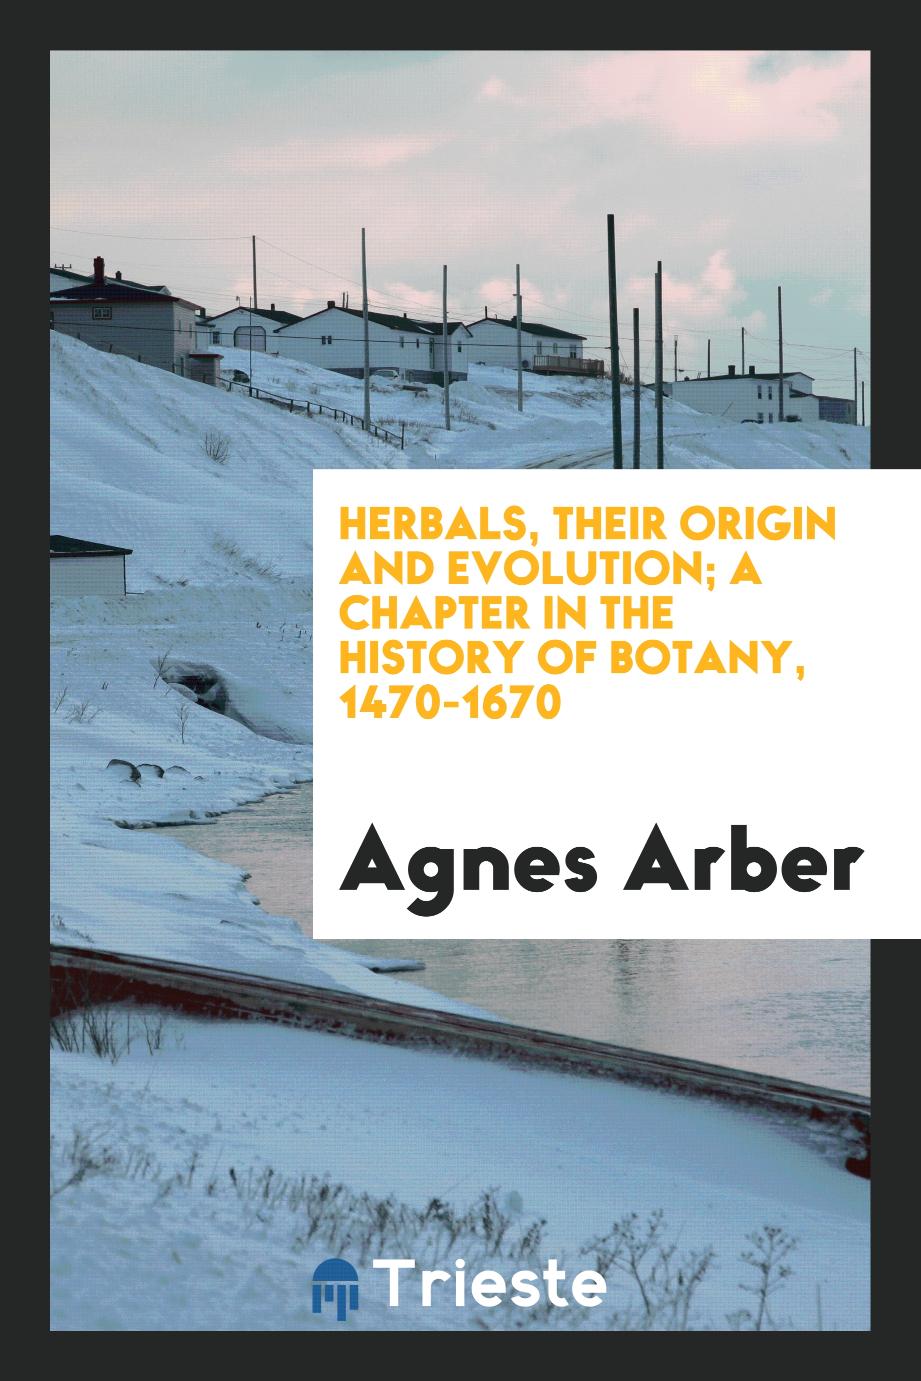 Herbals, Their Origin and Evolution; A Chapter in the History of Botany, 1470-1670